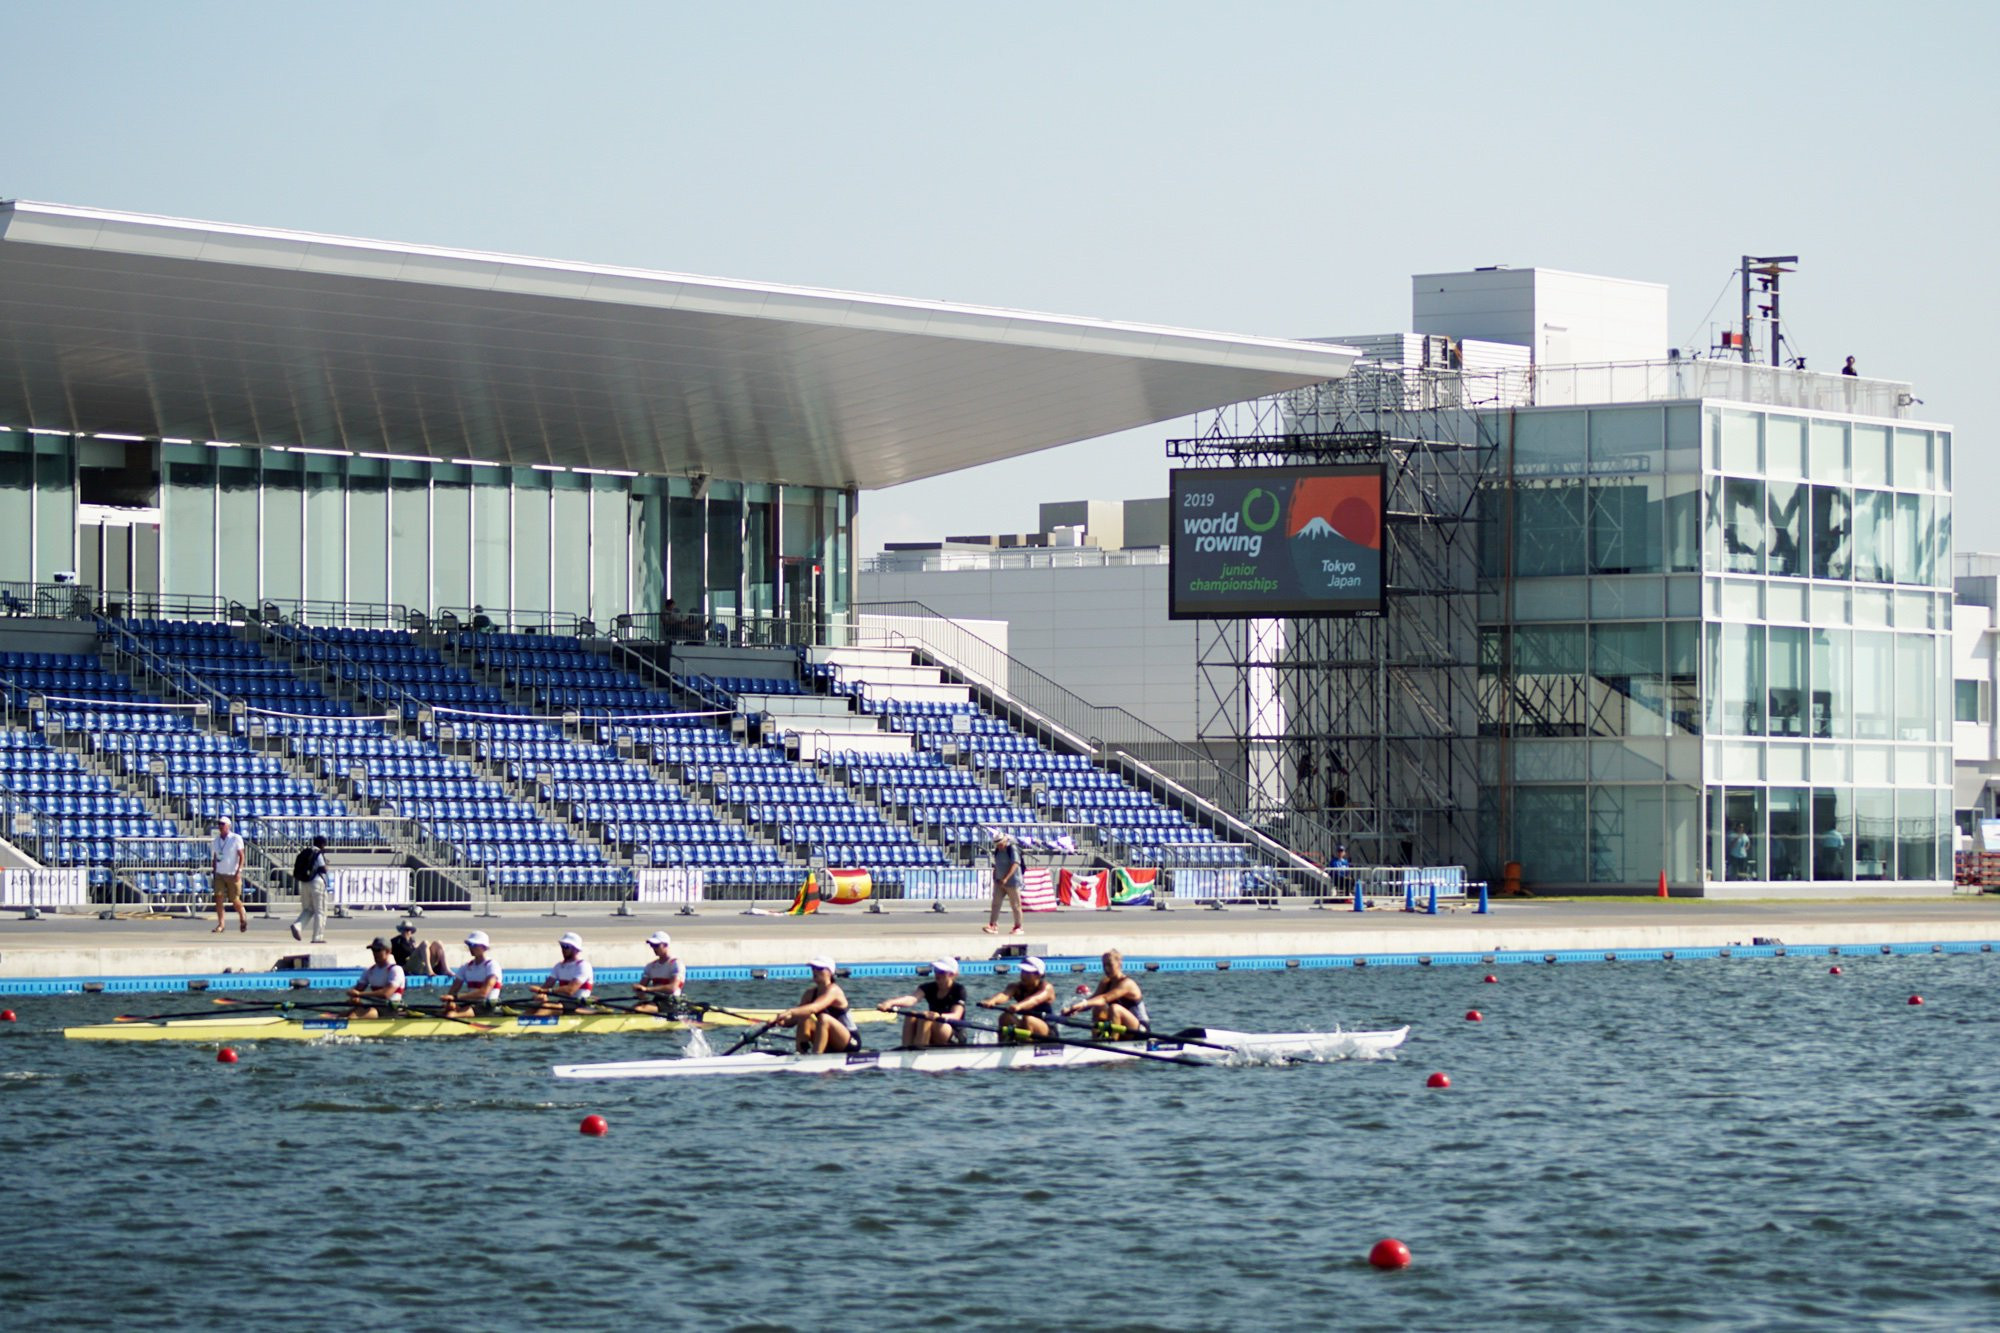 United States crews navigate repechage to reach finals at World Rowing Junior Championships